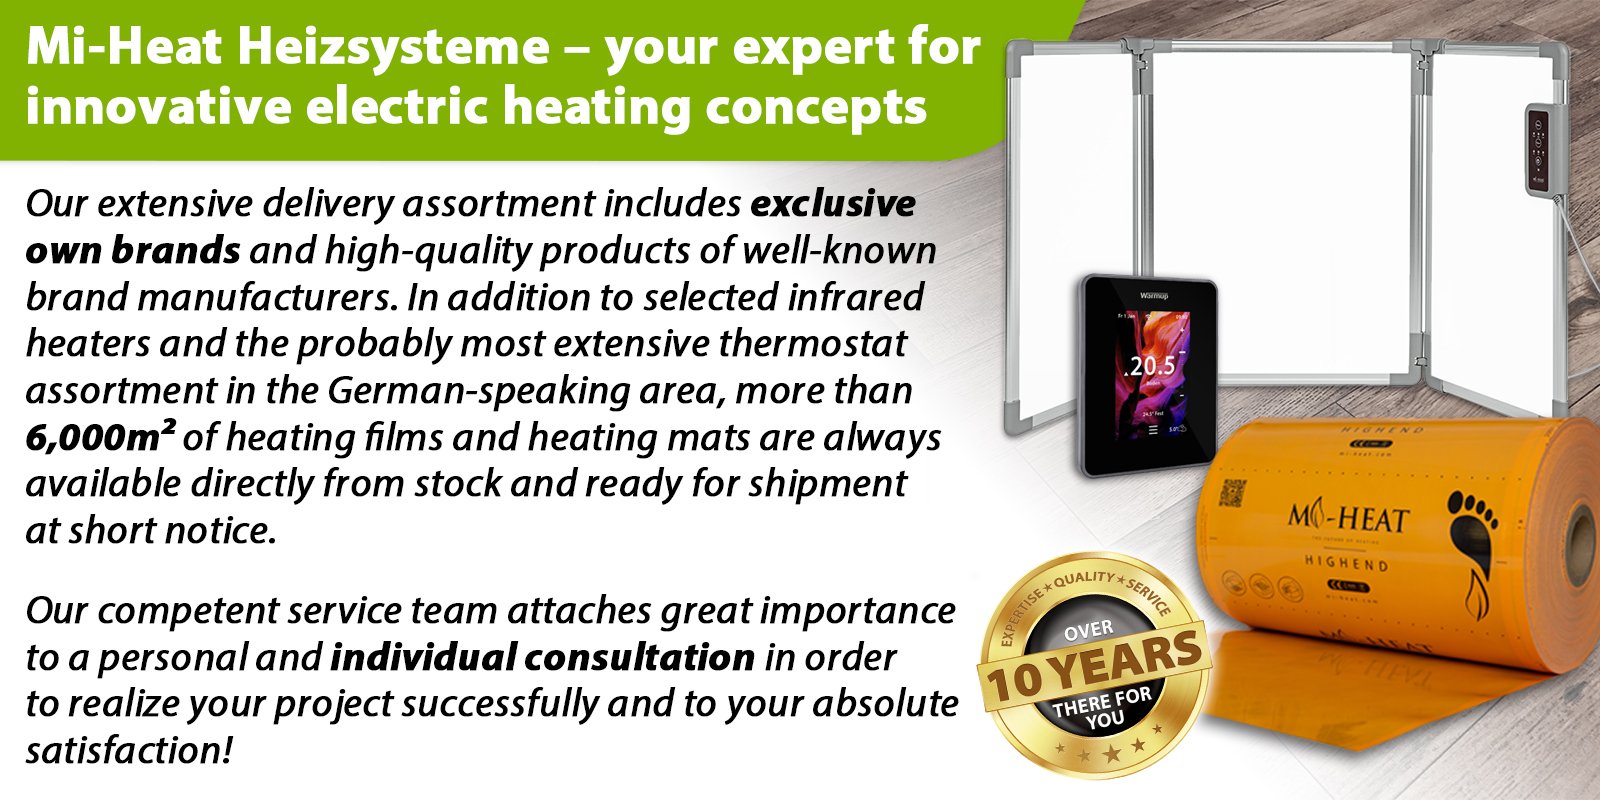 Mi-Heat heating systems is your expert for electric heating